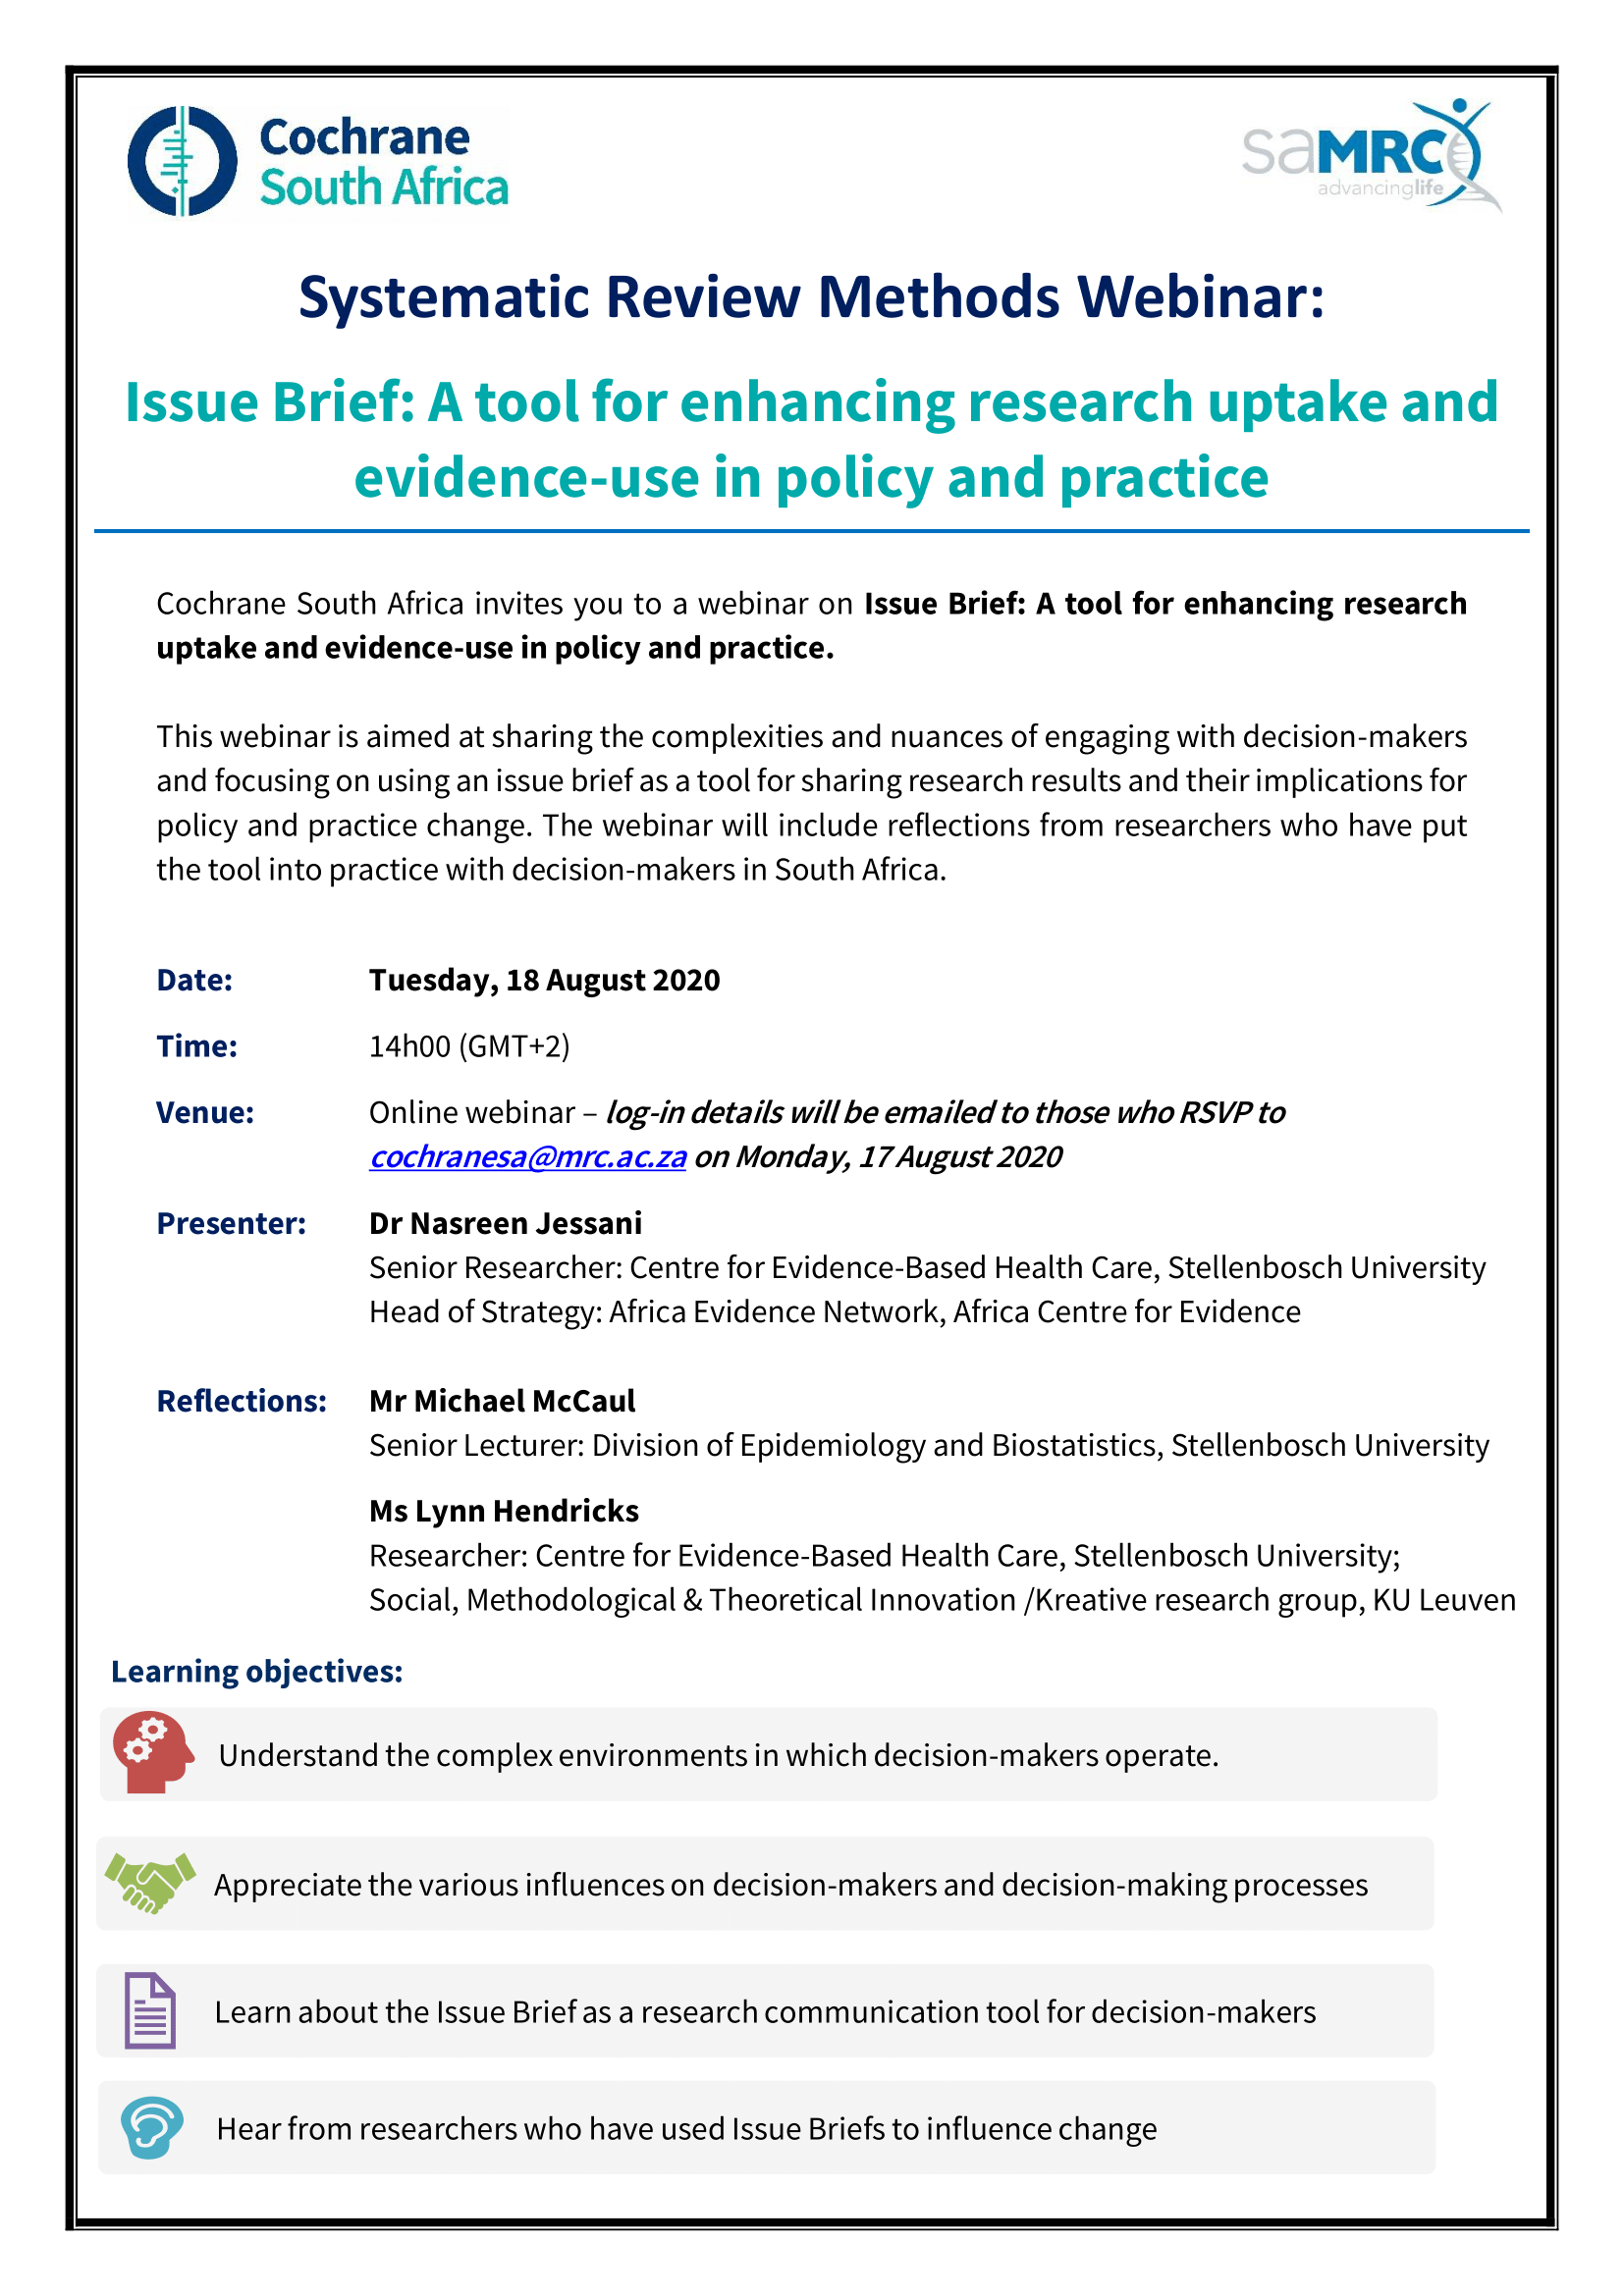 Issue brief: A tool for enhancing research uptake and evidence-use in policy and practice